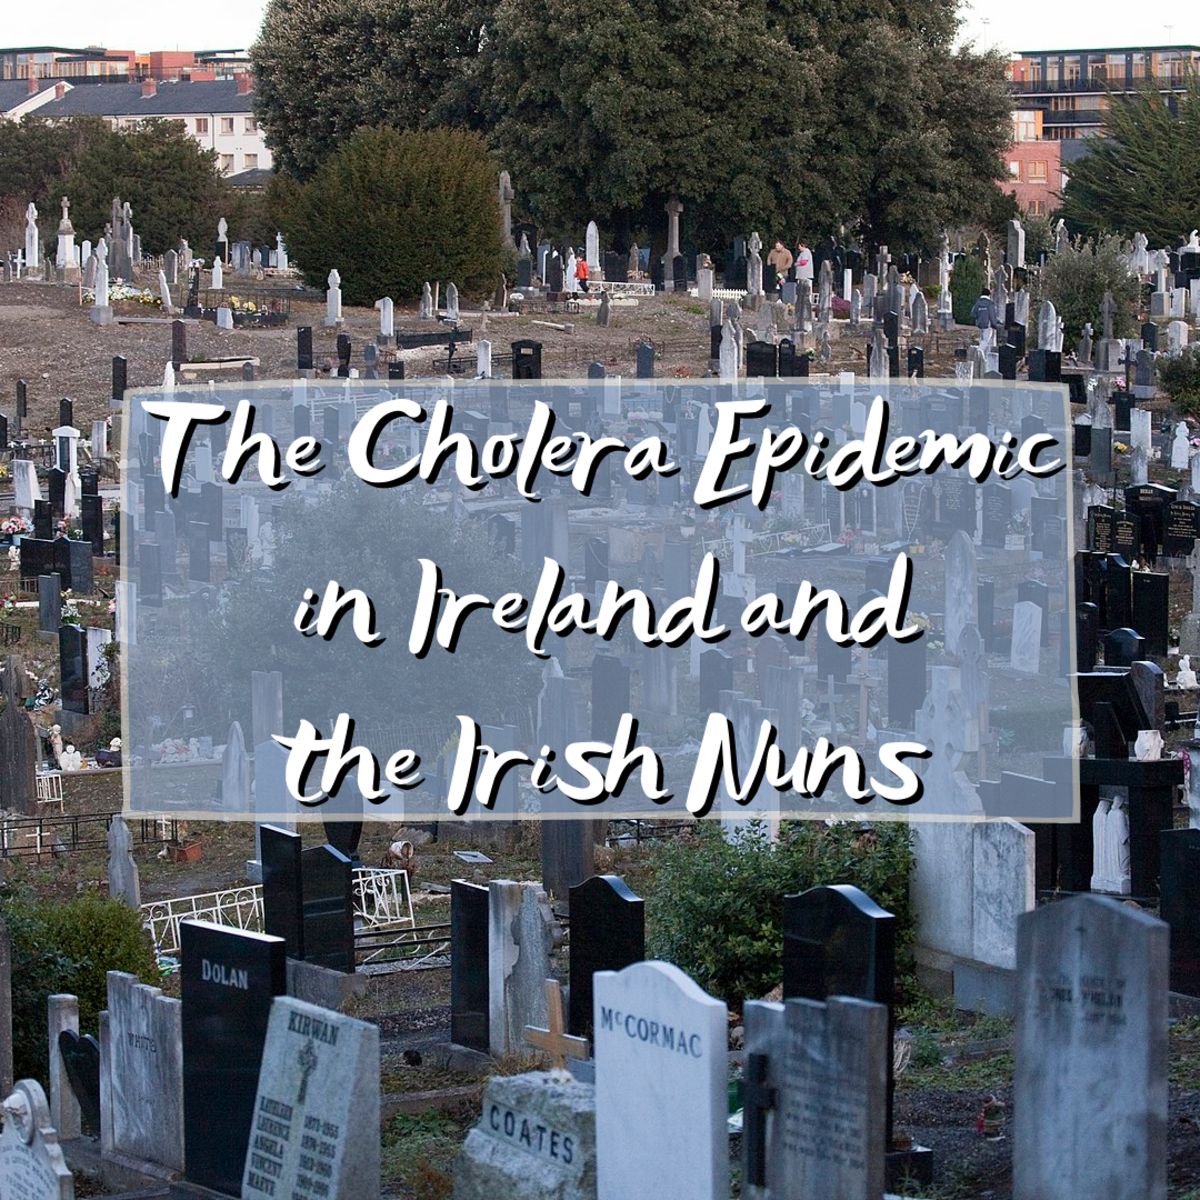 Read on to learn about slums in Dublin, Ireland, and the Irish cholera epidemic. You'll also learn about the inspiring story of Mother Mary Aikenhead, foundress of the Sisters of Charity. The above photo is of Glasnevin Cemetery, established In 1832.